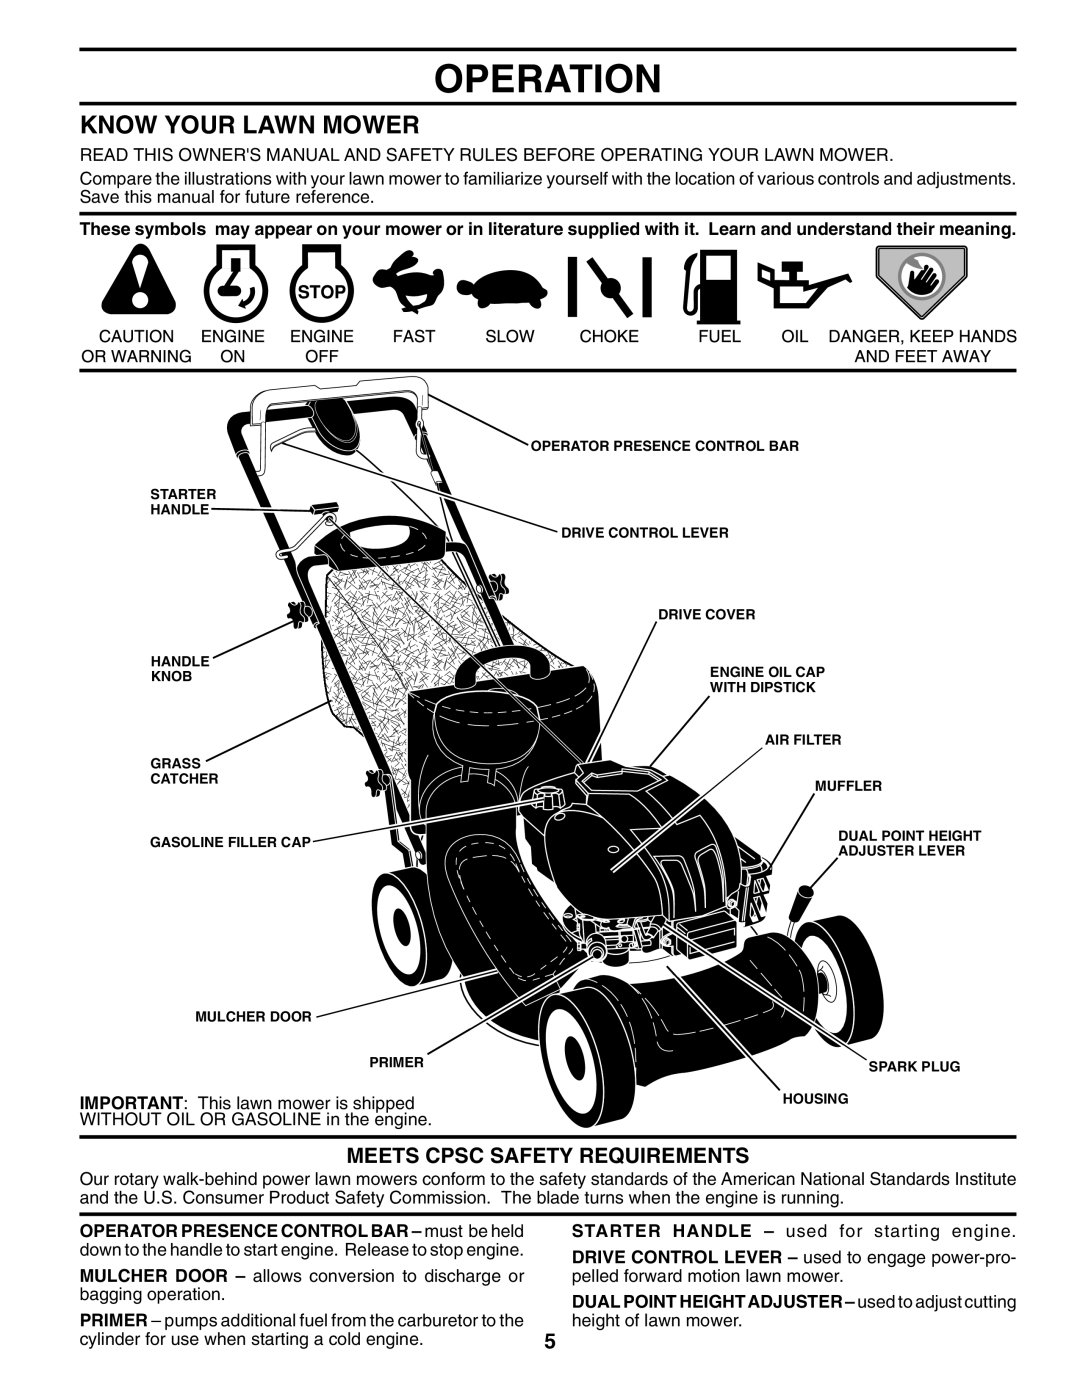 Husqvarna 70R21HV owner manual Operation, Know Your Lawn Mower, Meets Cpsc Safety Requirements 